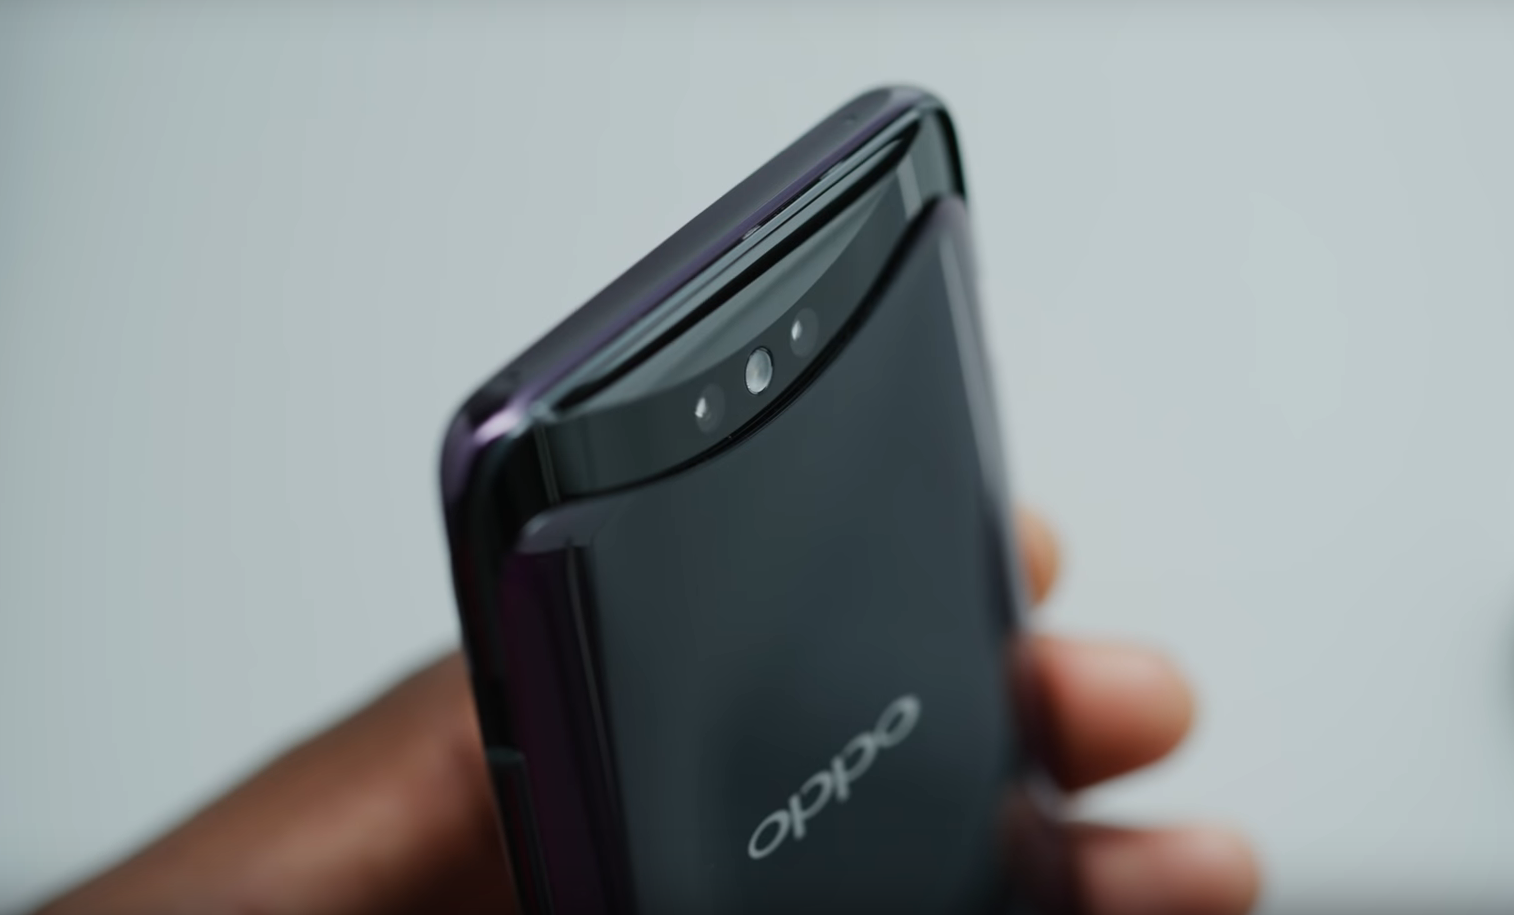 Overview of the pros and cons of the Oppo Find X smartphone